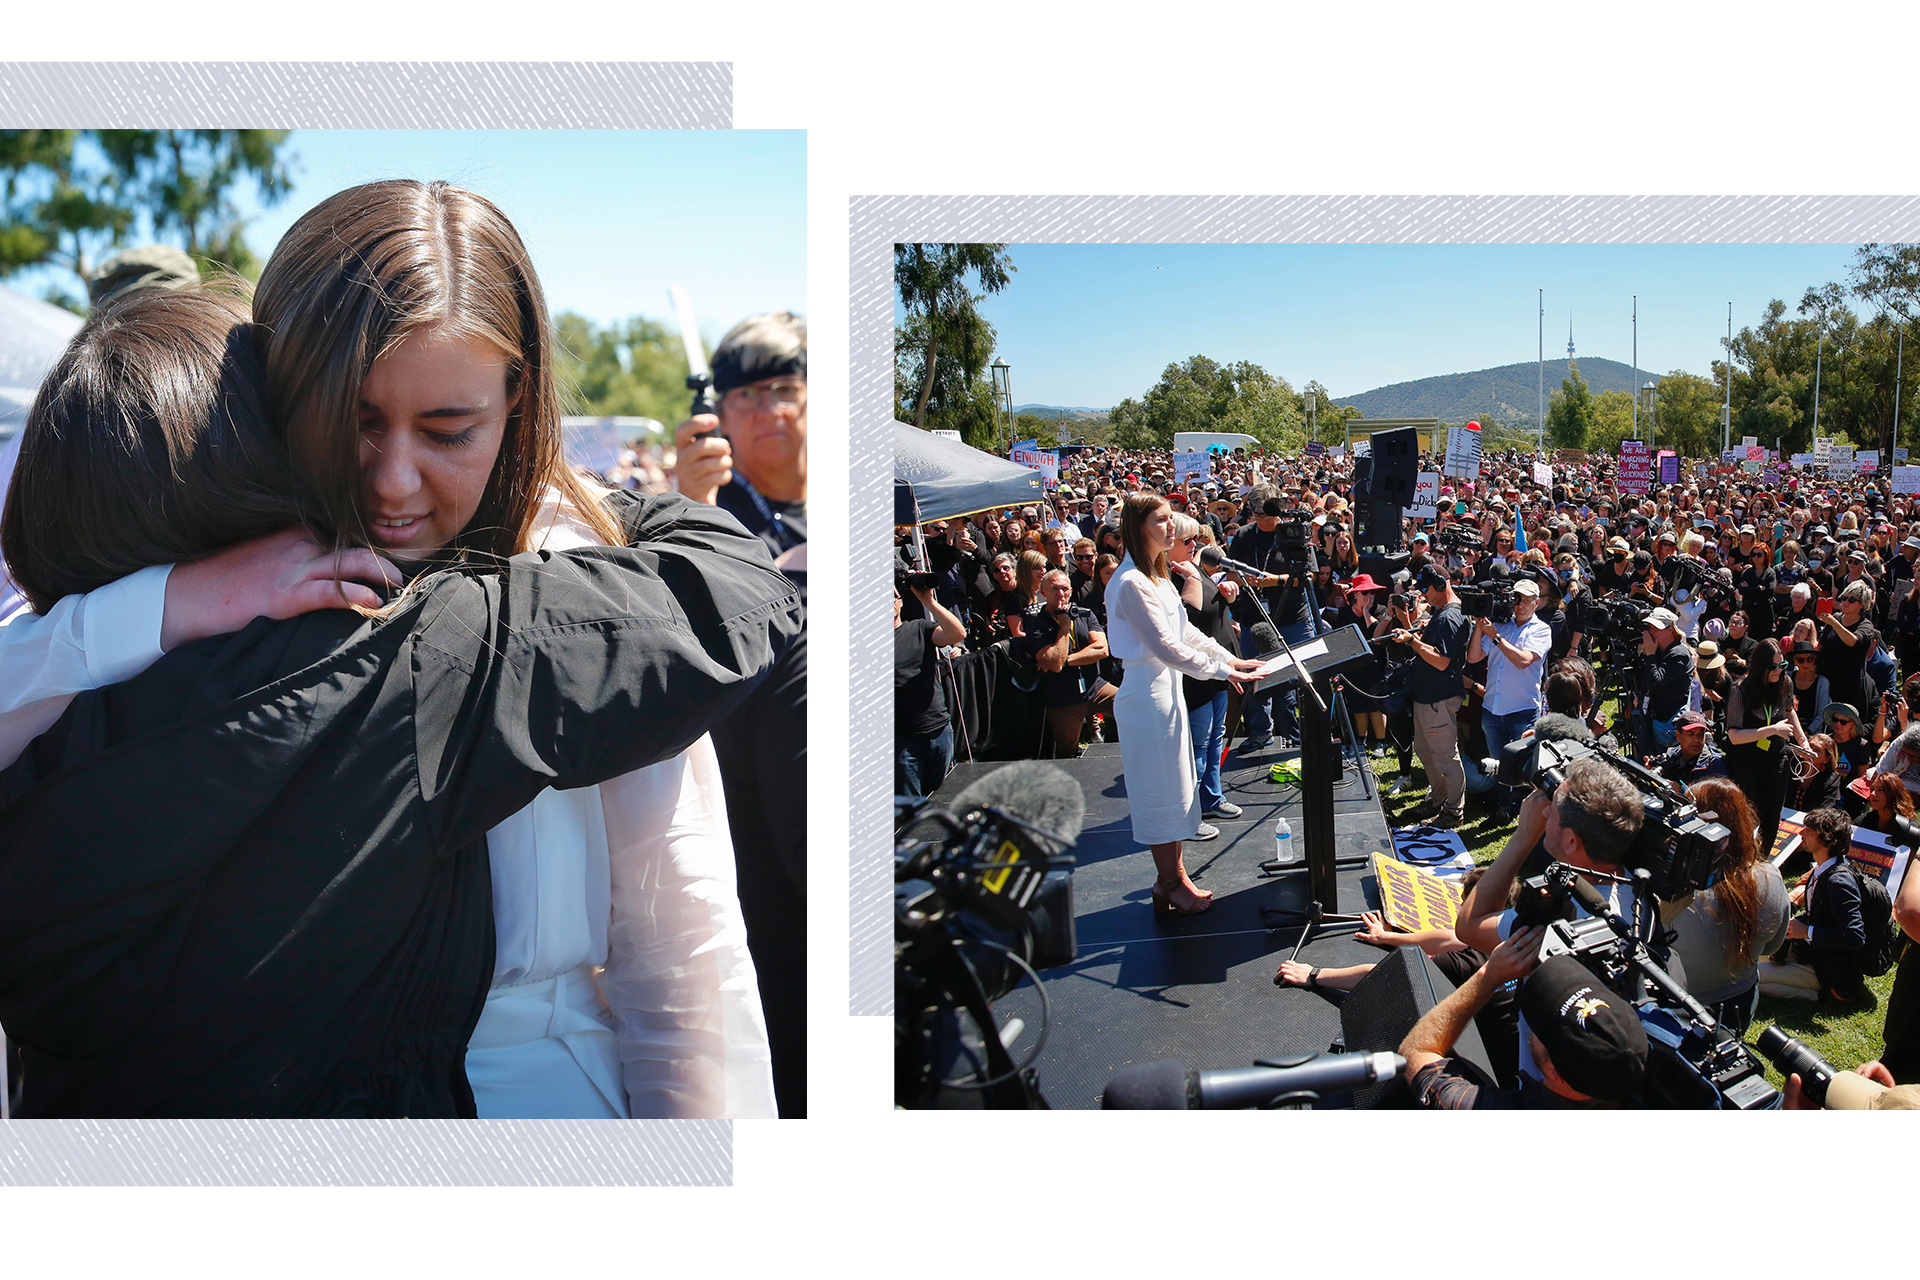 Brittany Higgins embraces another woman, beside another wider photo of her addressing a protest from a stage.